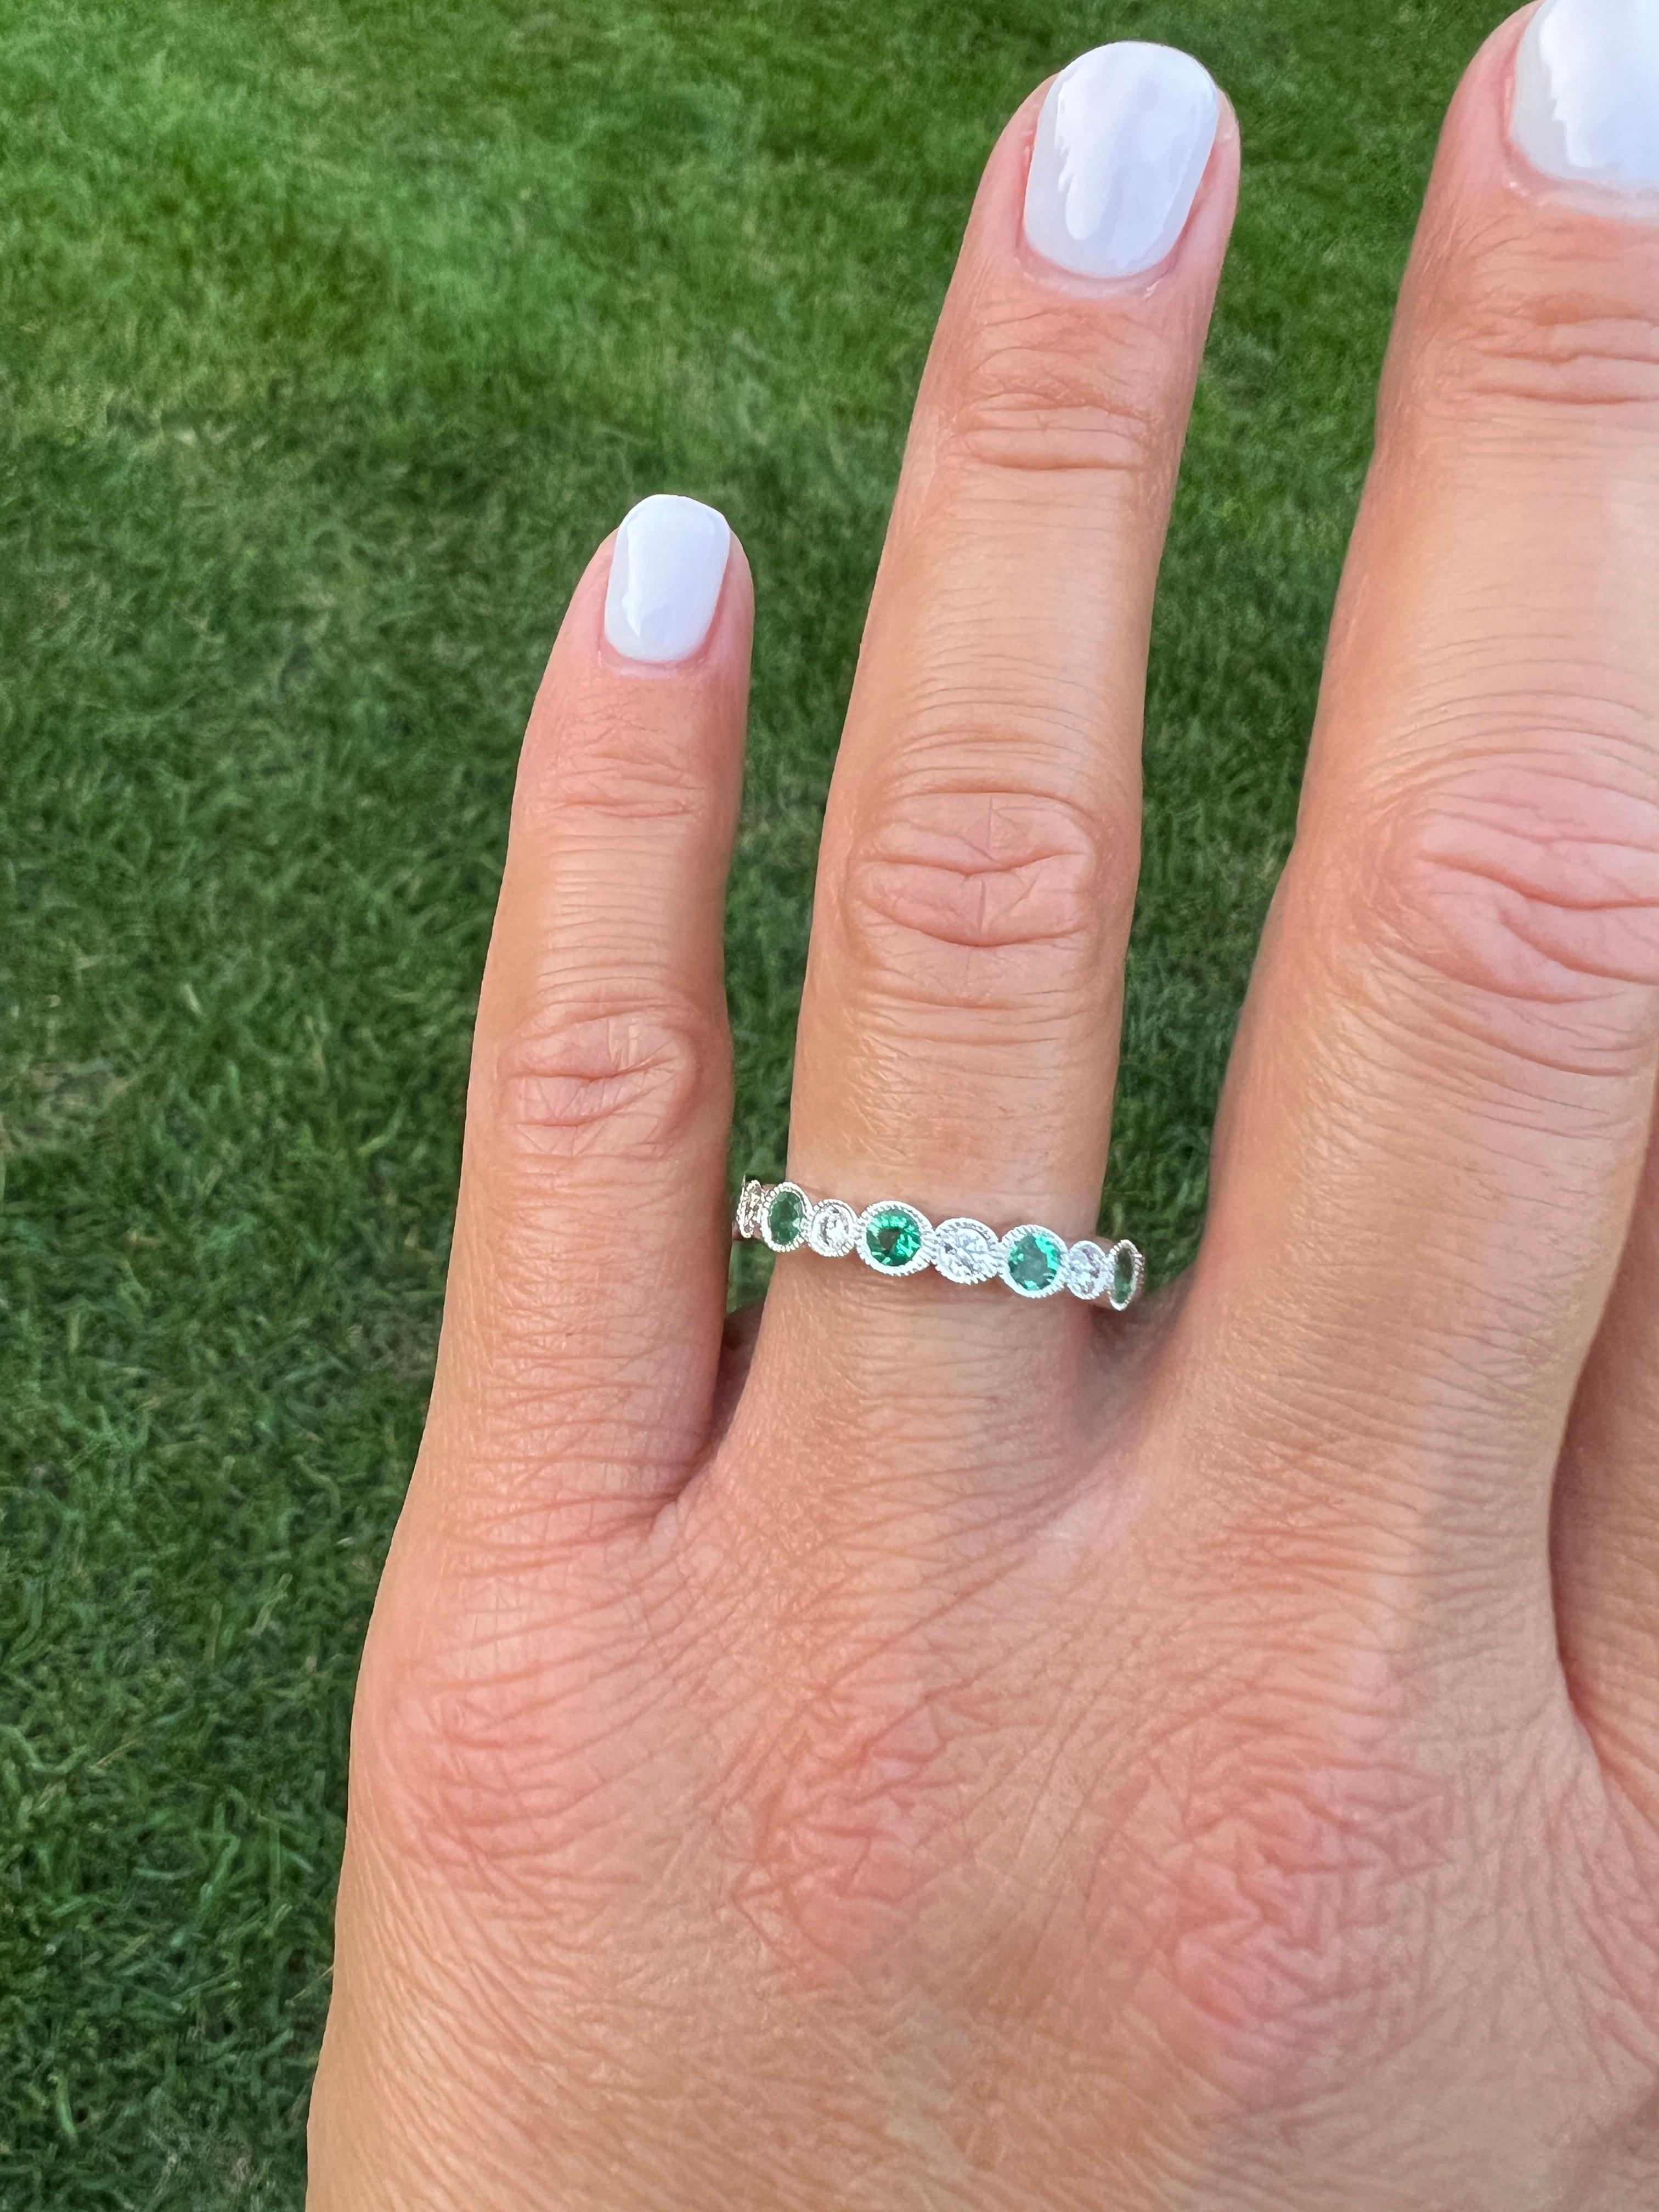 Looking for a stunning piece of jewelry to make a statement? Look no further with this round emerald and round diamond eternity ring. With its classic design and timeless beauty, this ring is the perfect way to add a touch of elegance to any outfit.